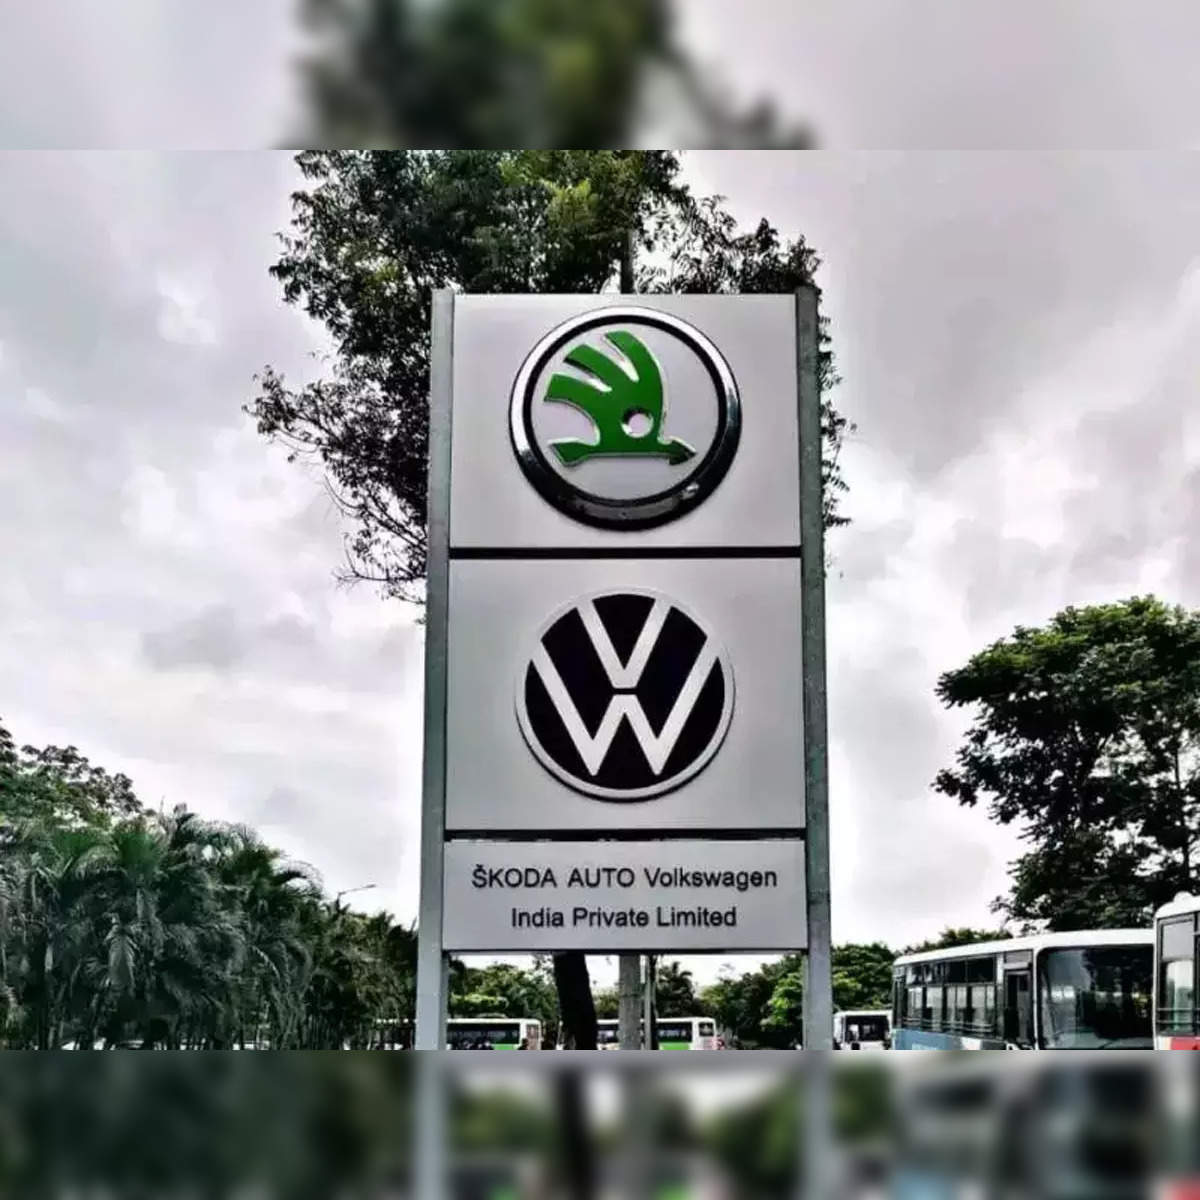 india: Skoda Auto Volkswagen India invokes force majeure in India due to  chip shortage - The Economic Times